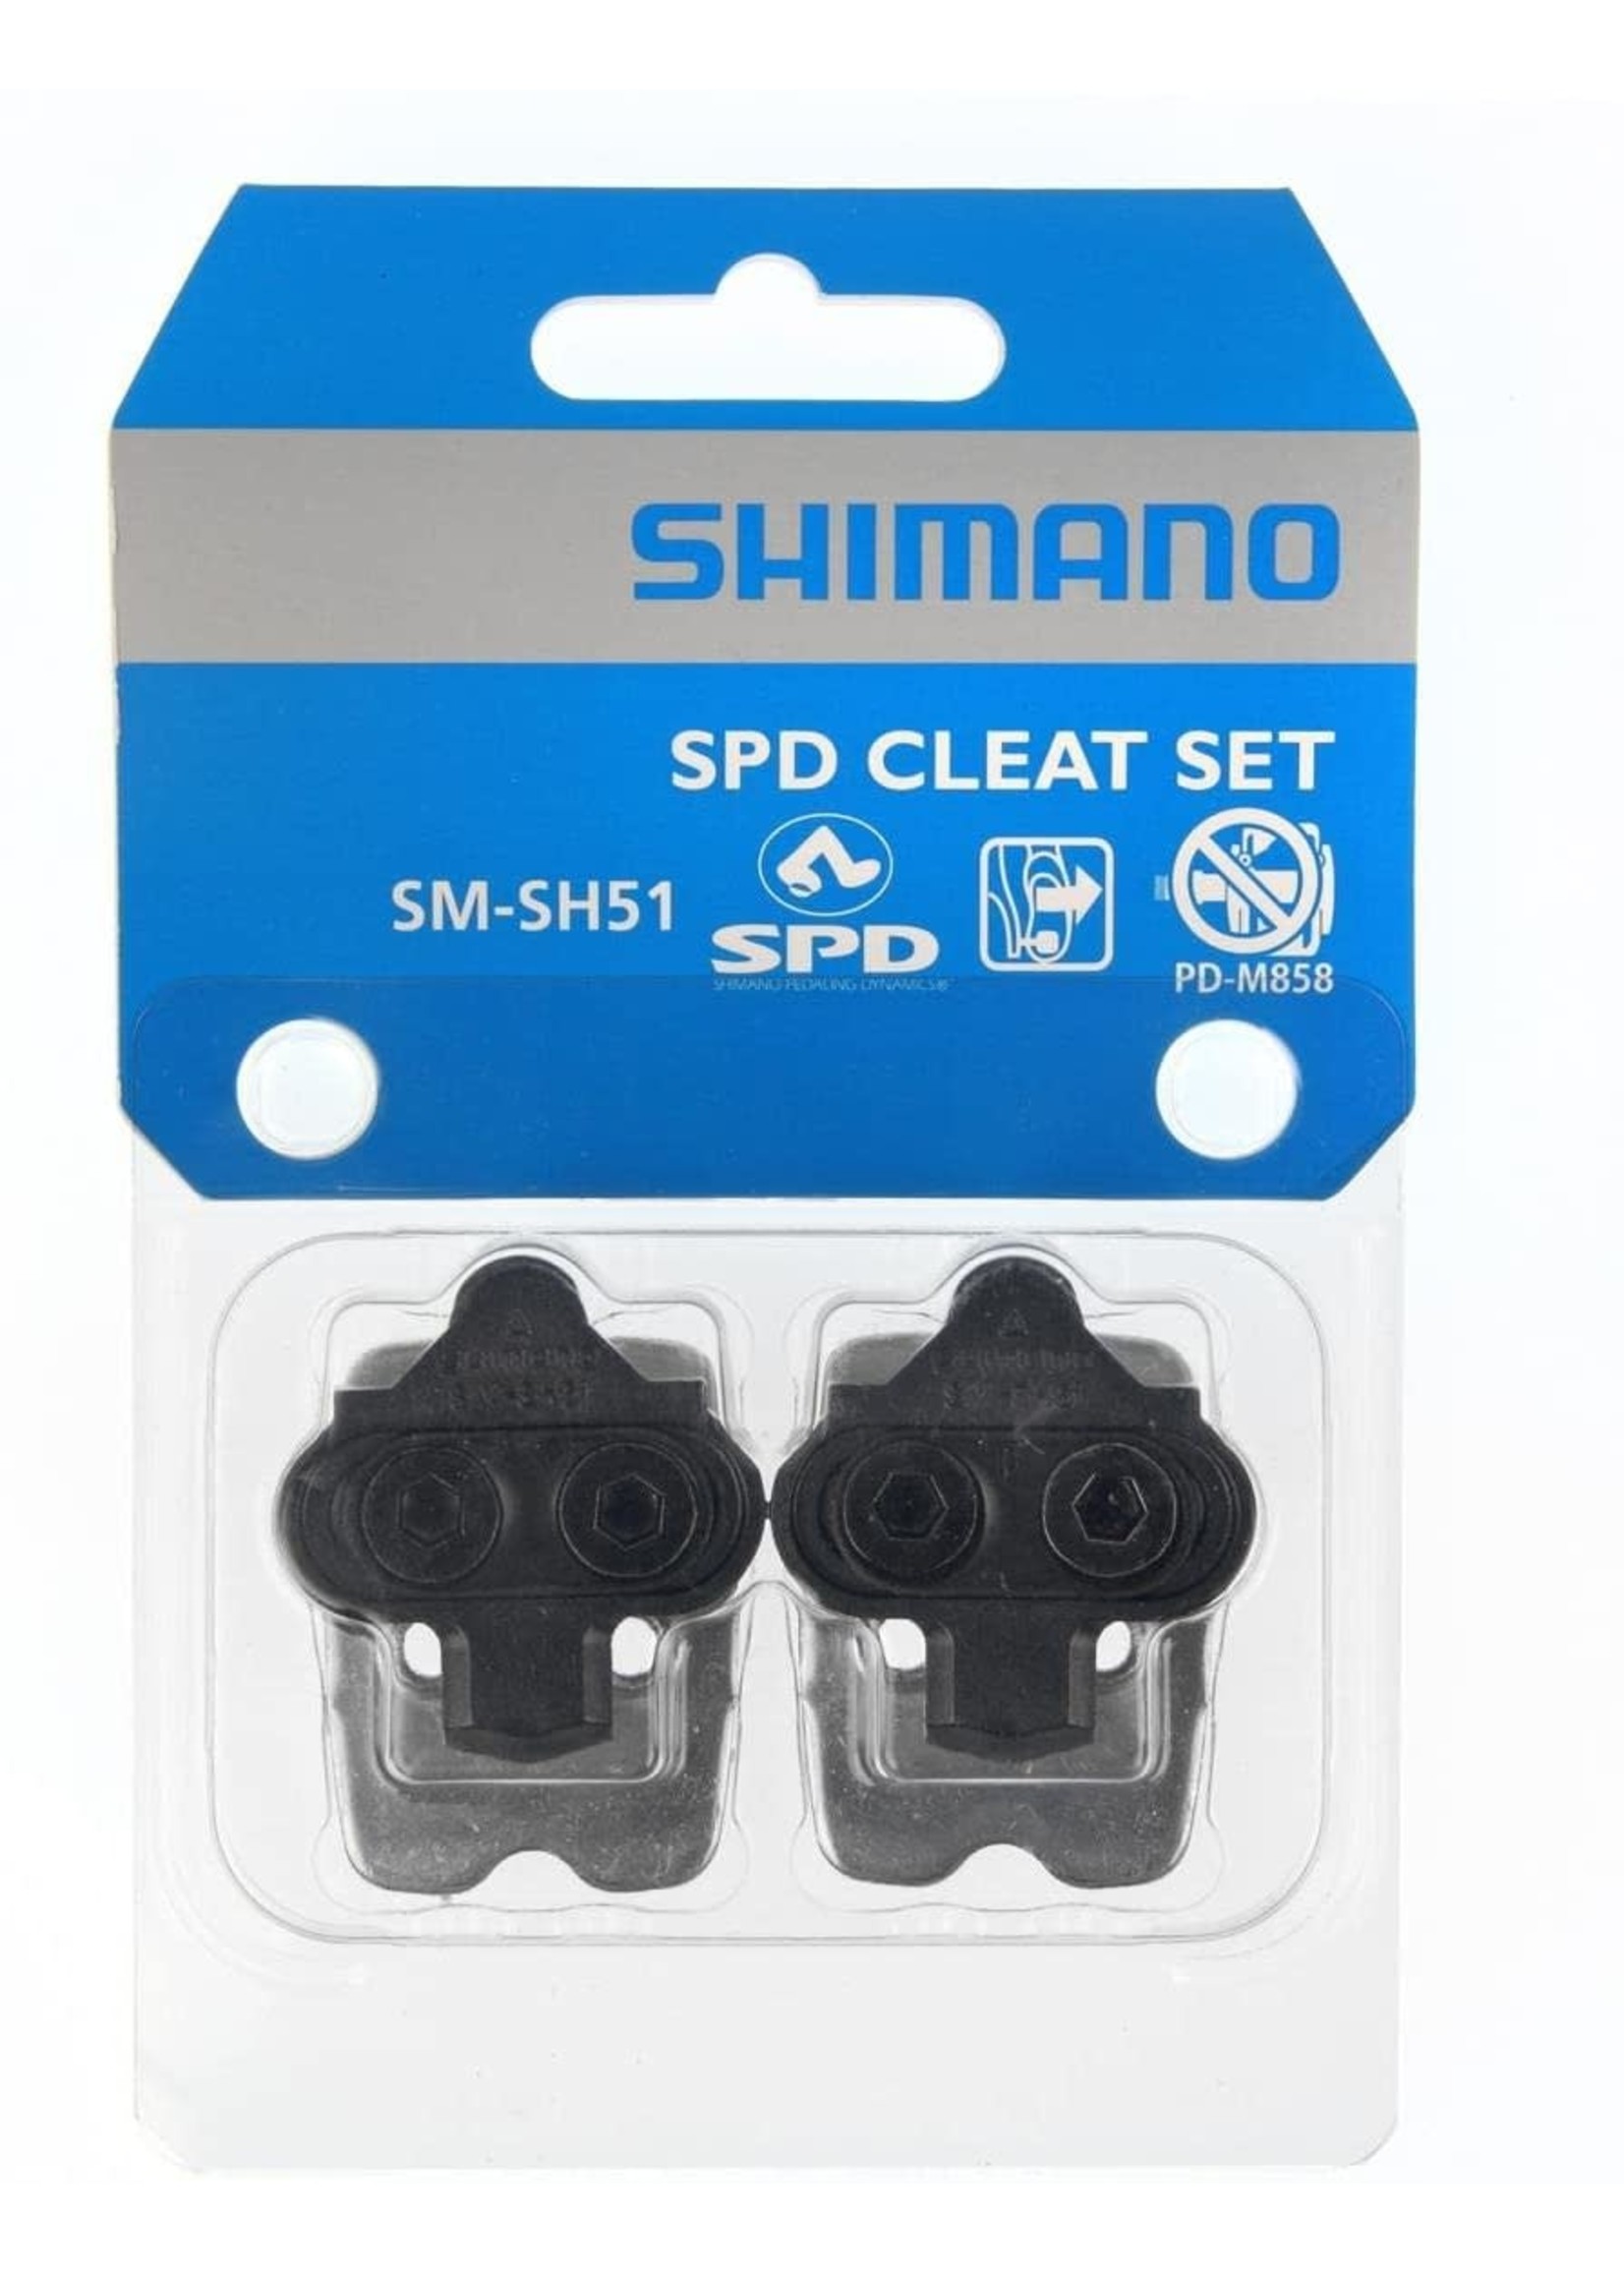 Shimano Pedal Cleat Set SHIMANO SM-SH51, PAIR W/O CLEAT NUTS,SINGLE RELEASE